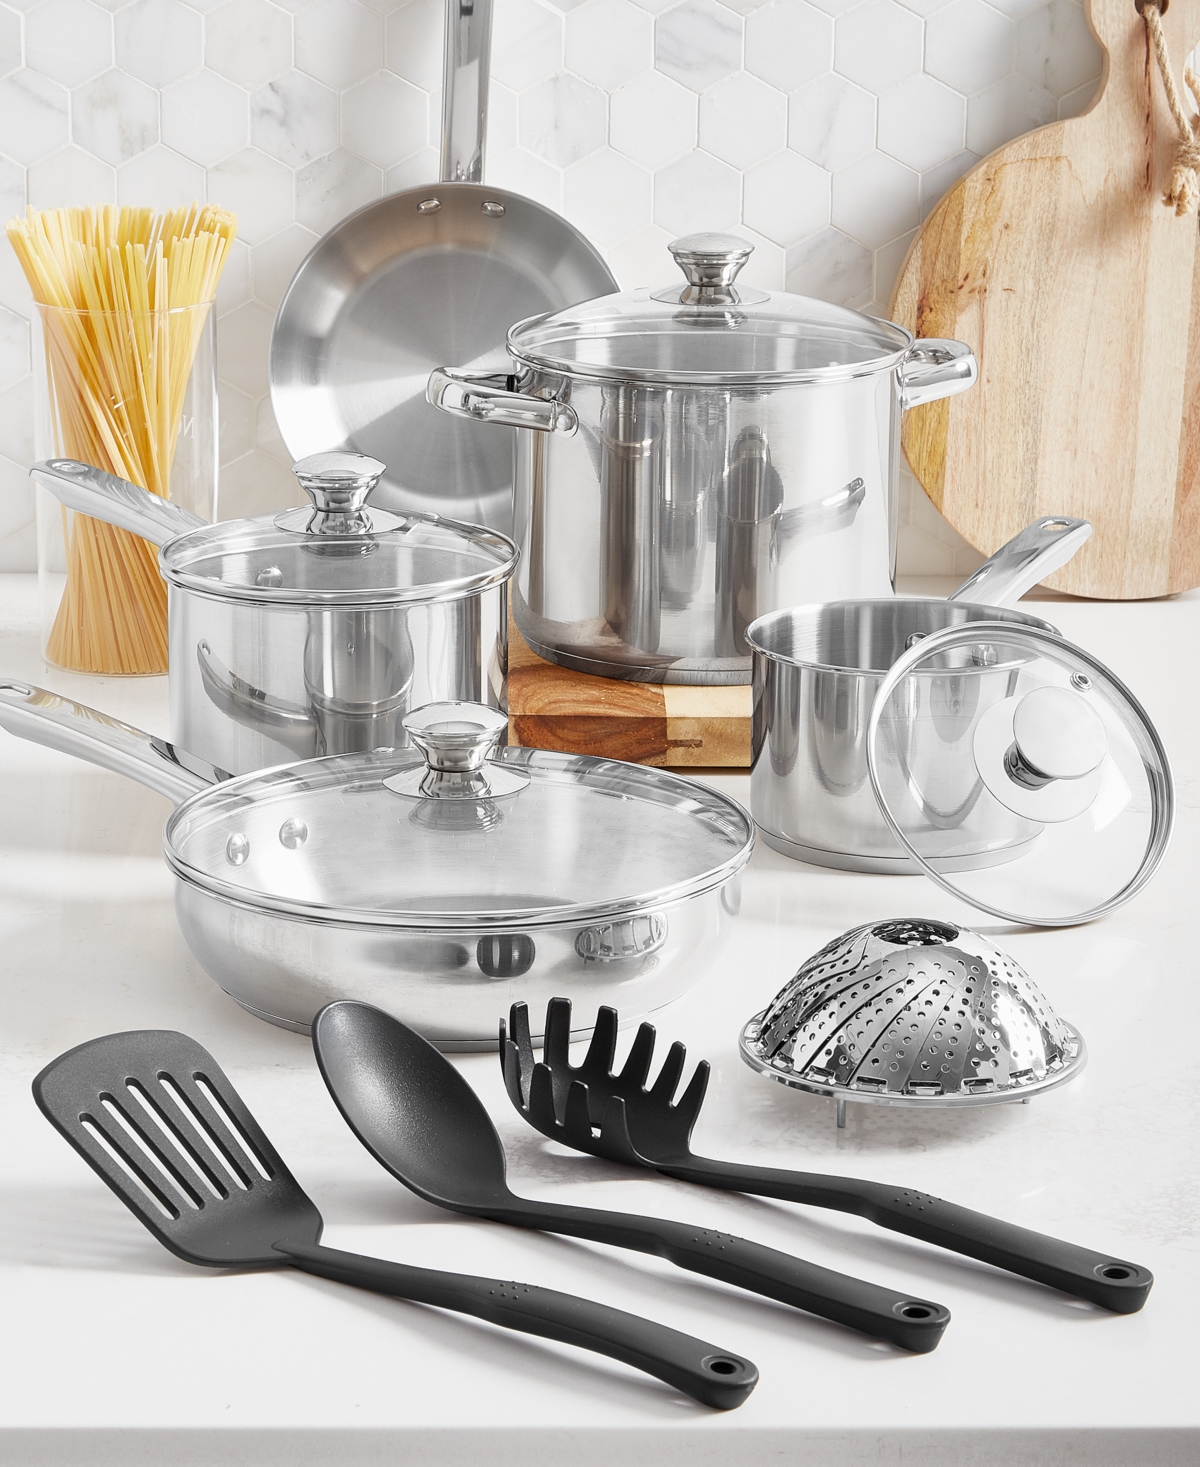 25 Pieces Stainless Steel Kitchen Cooking Utensil Set Non Stick Serving Tools 